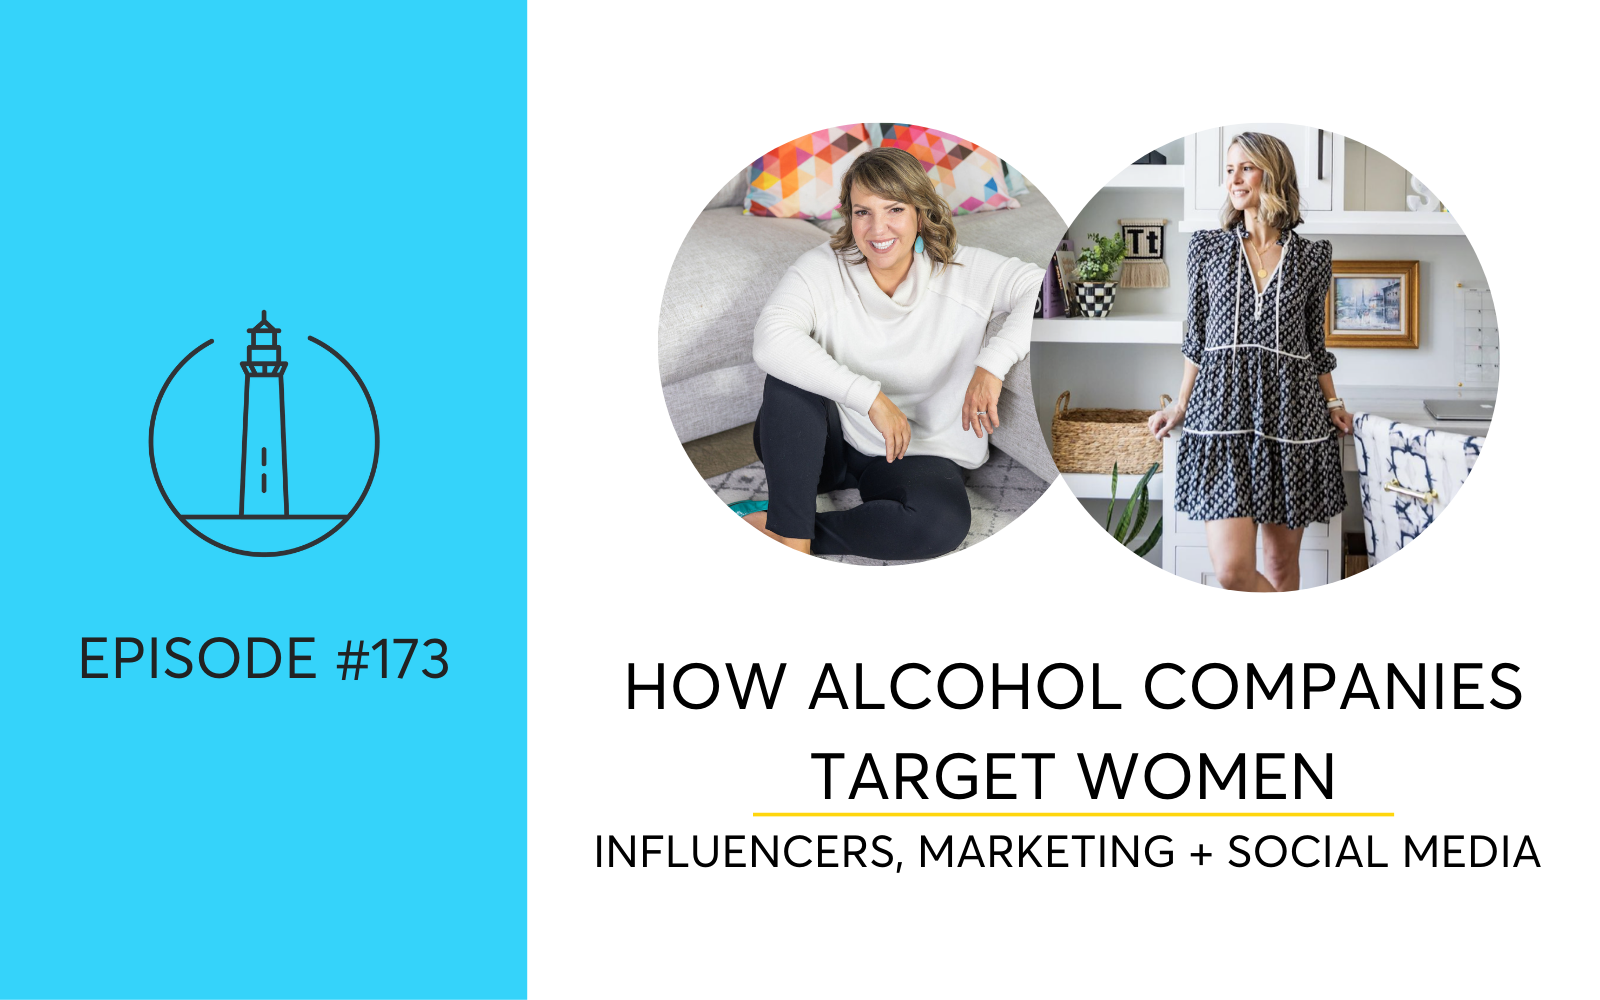 How The Alcohol Industry Targets Women Through Influencers, Marketing and Social Media